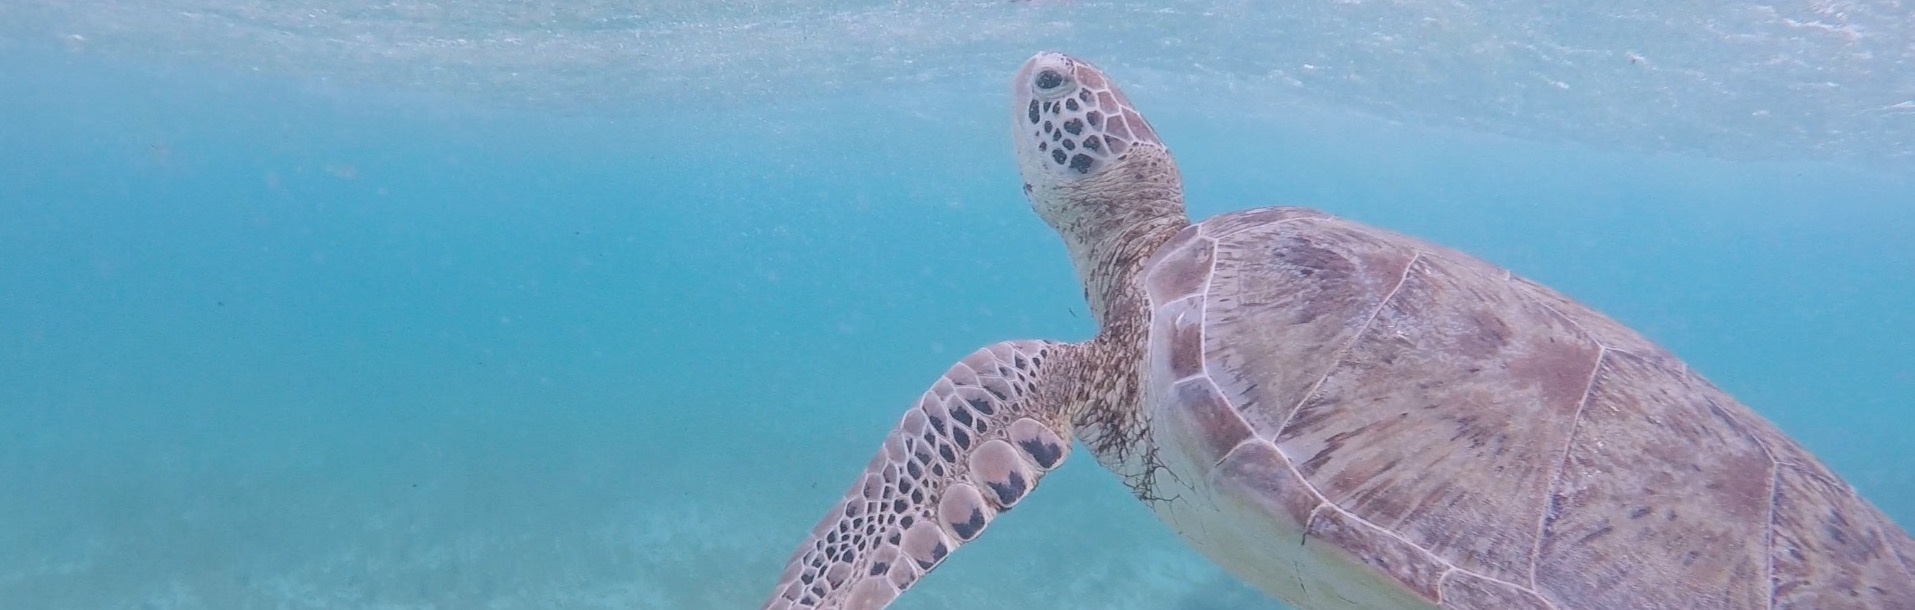 Swimming with a green turtle in Tobago Cays - Caribbean